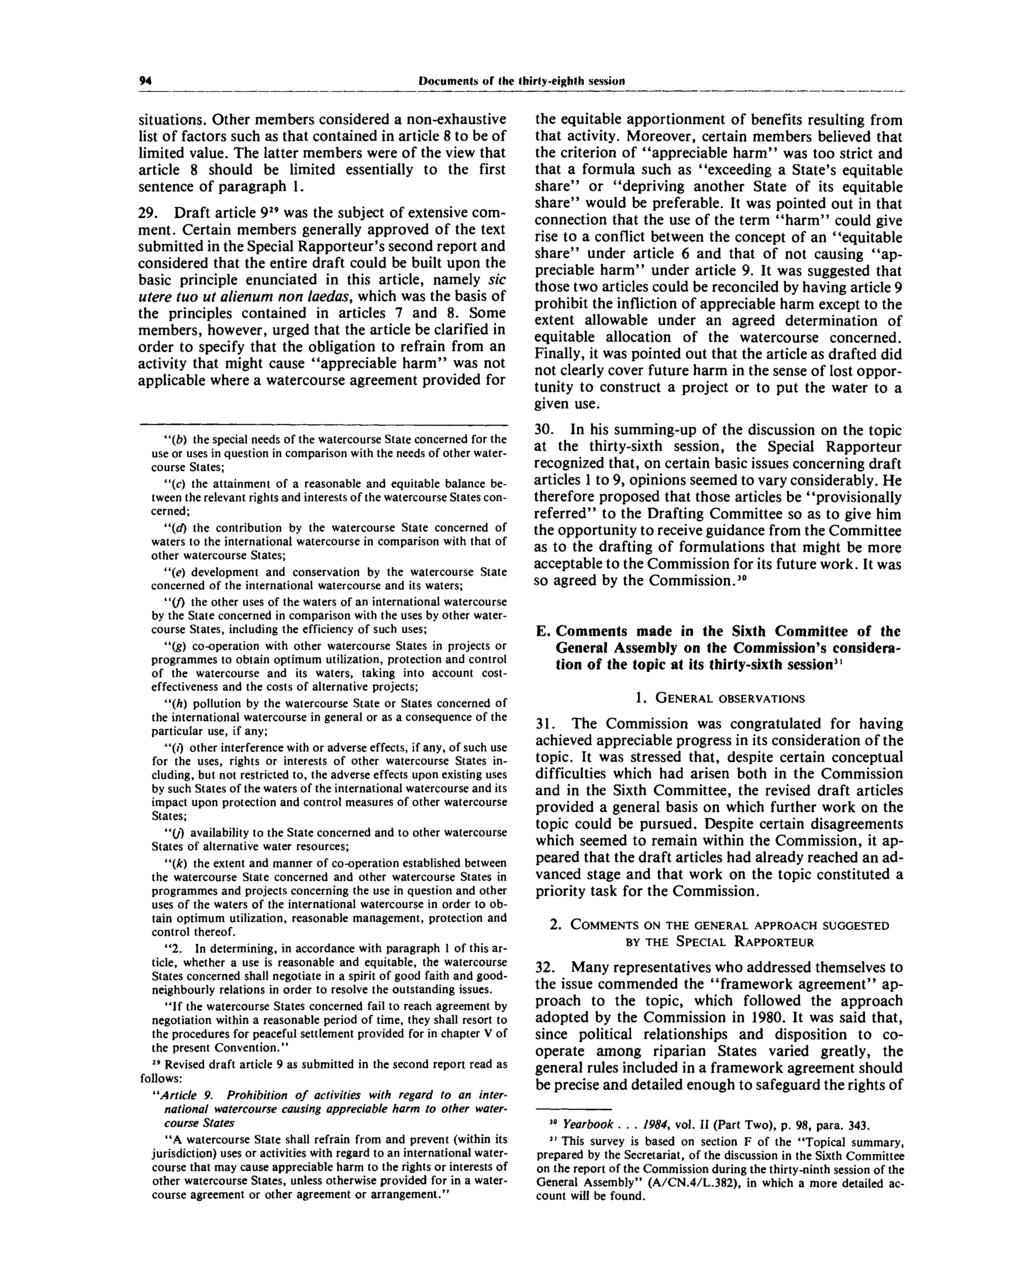 94 Documents of (he thirty-eighth session situations. Other members considered a non-exhaustive list of factors such as that contained in article 8 to be of limited value.